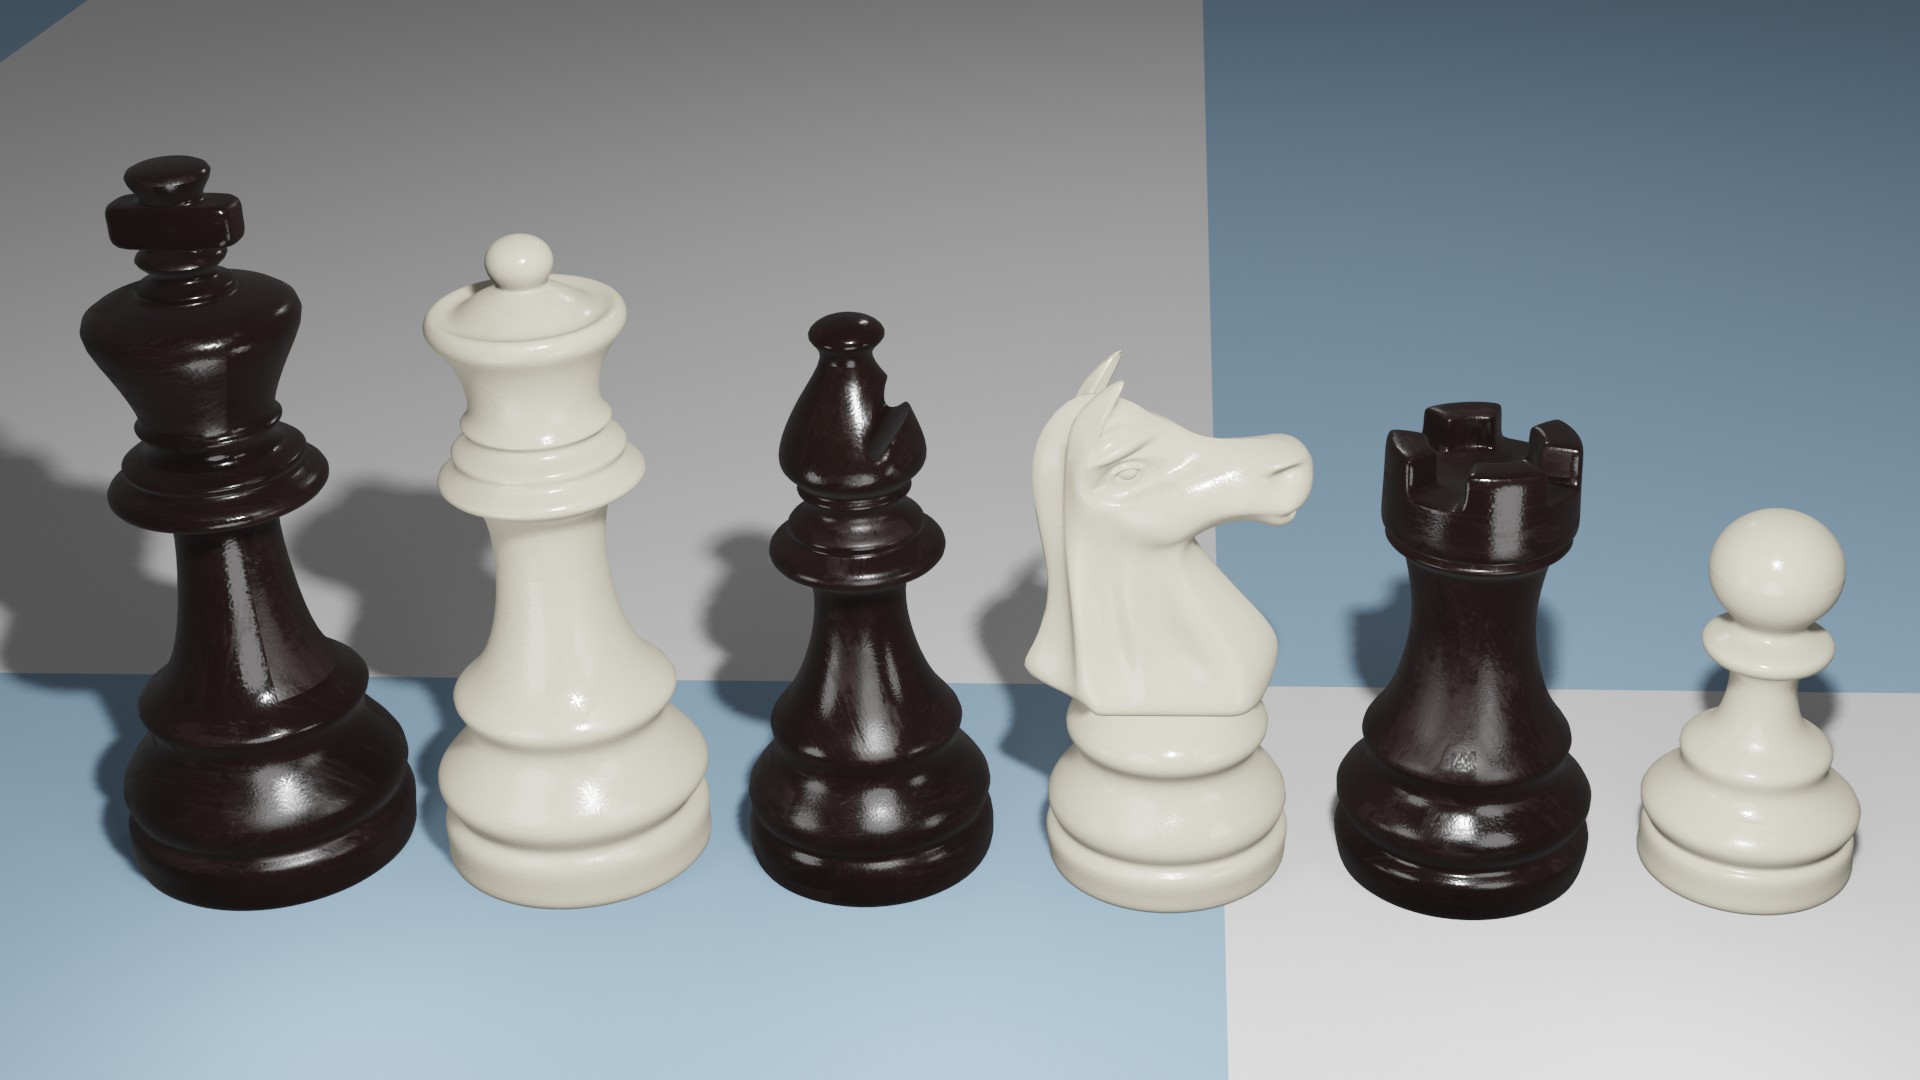 rendering of 3D chess pieces